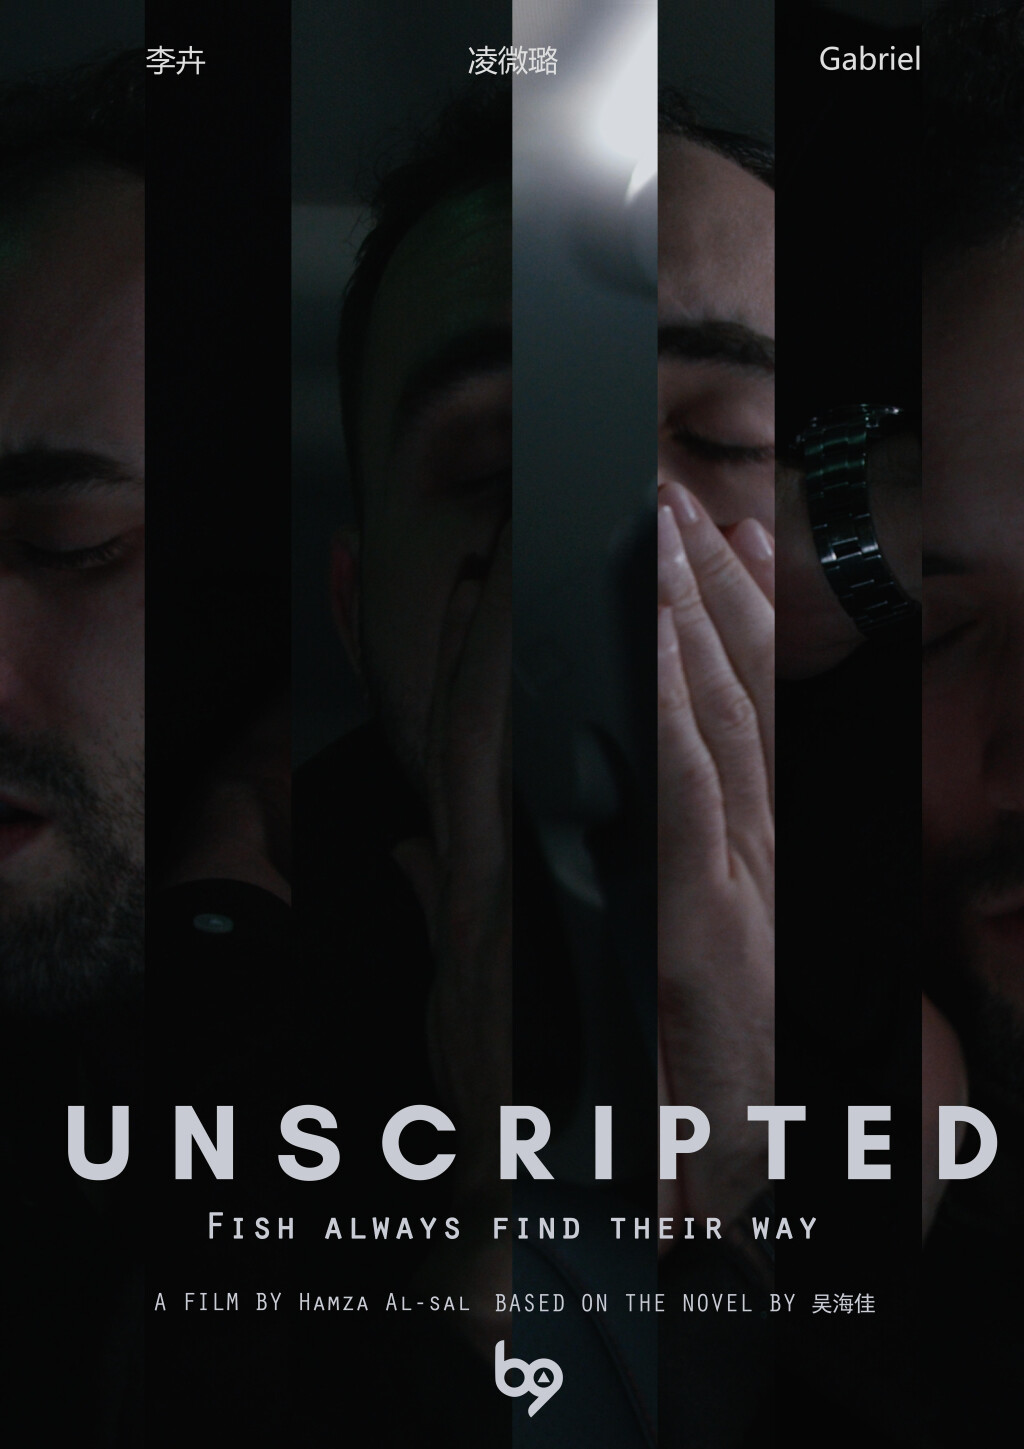 Filmposter for Unscripted